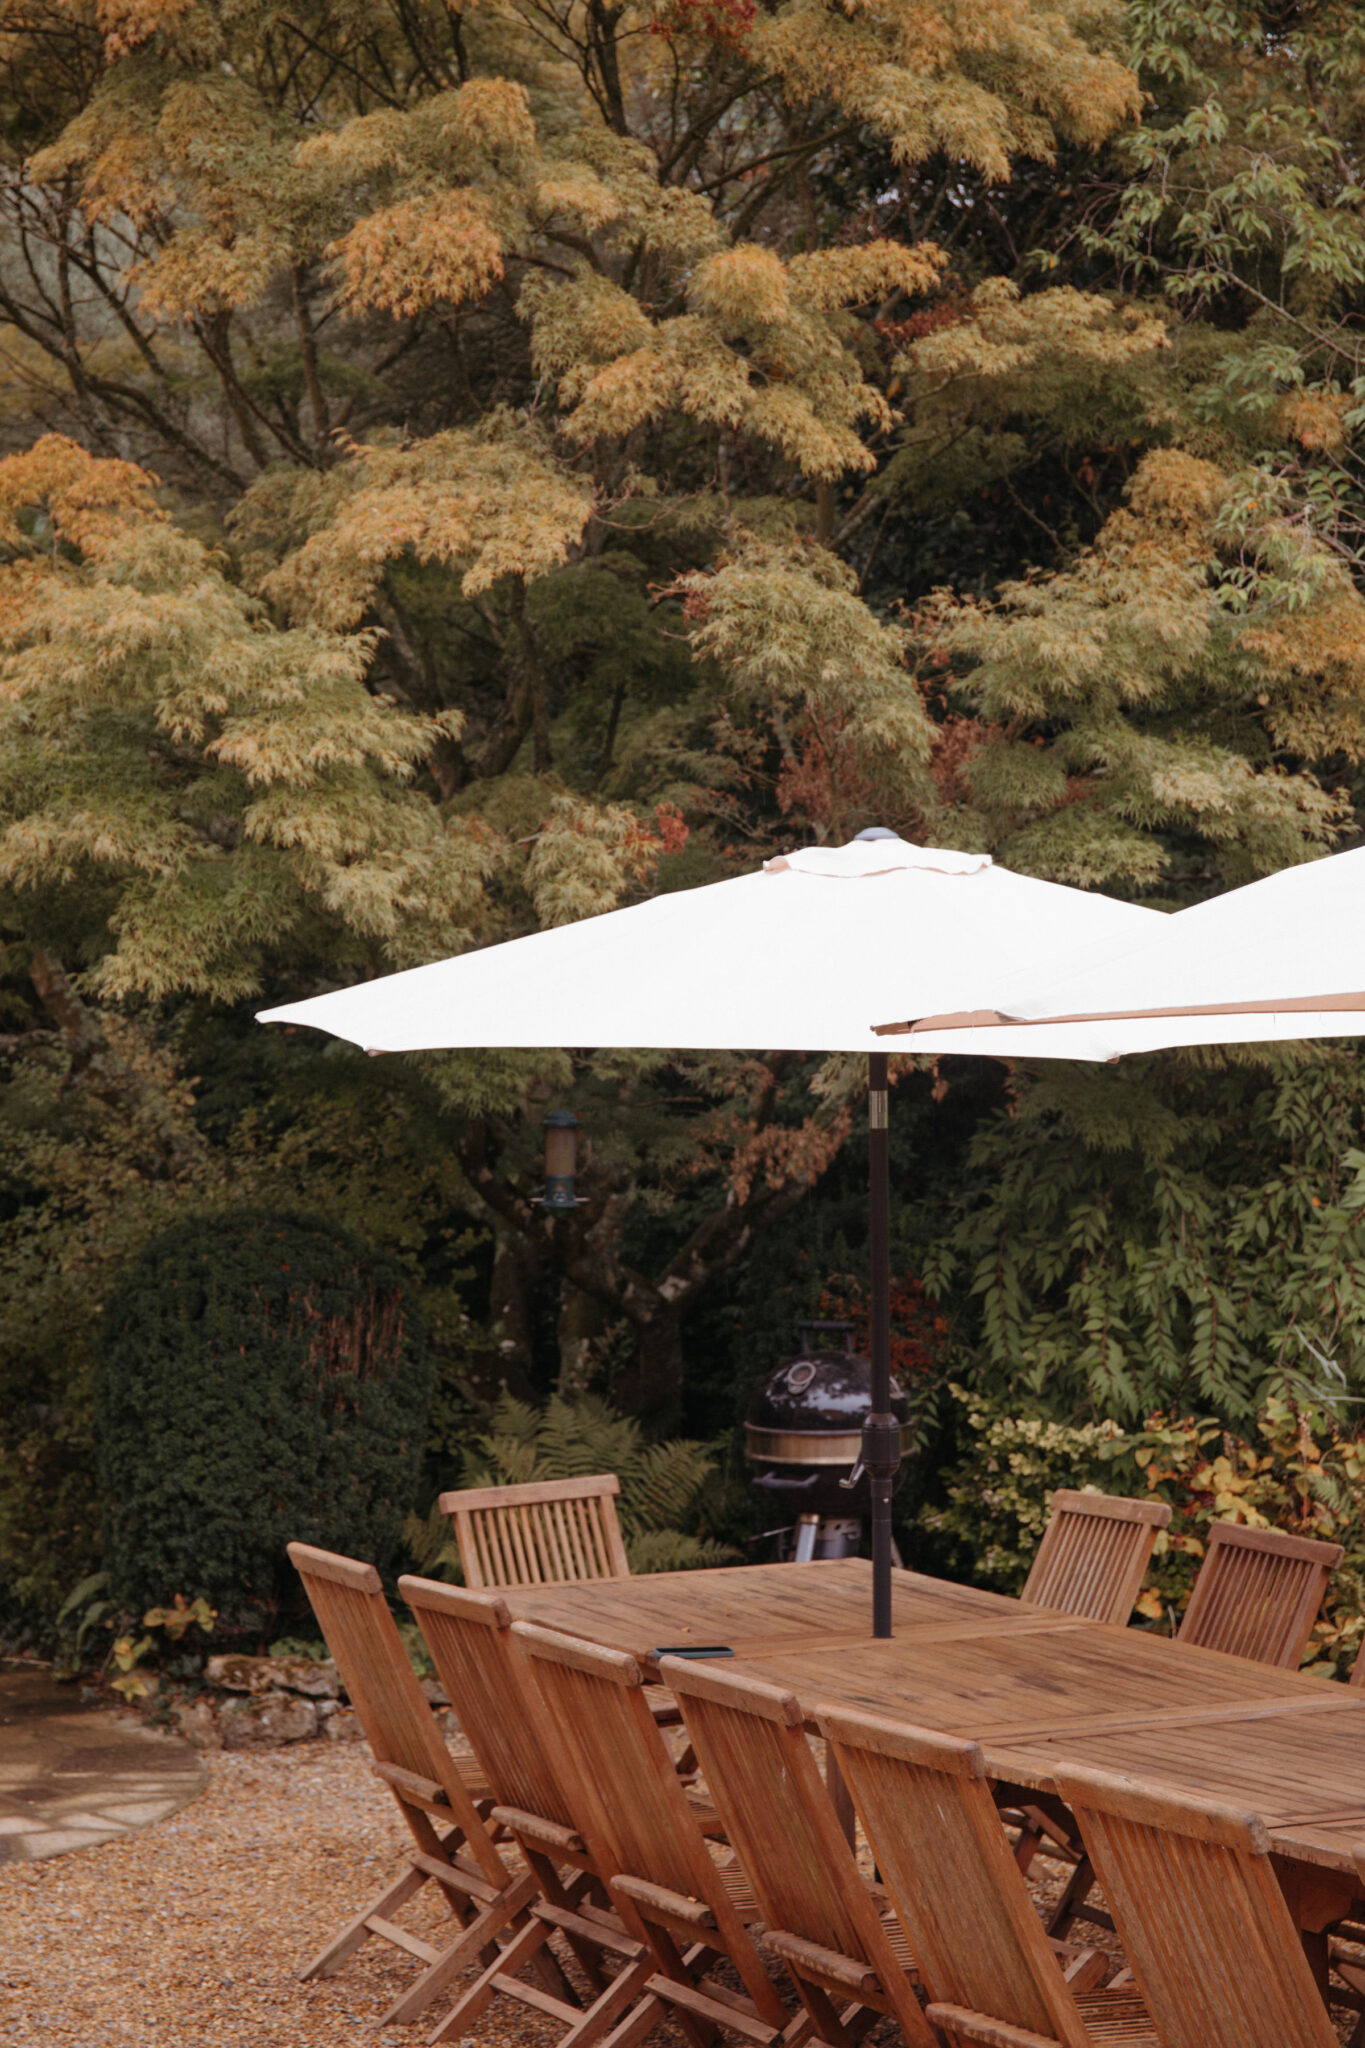 Wooden outdoor dining set with white parasols